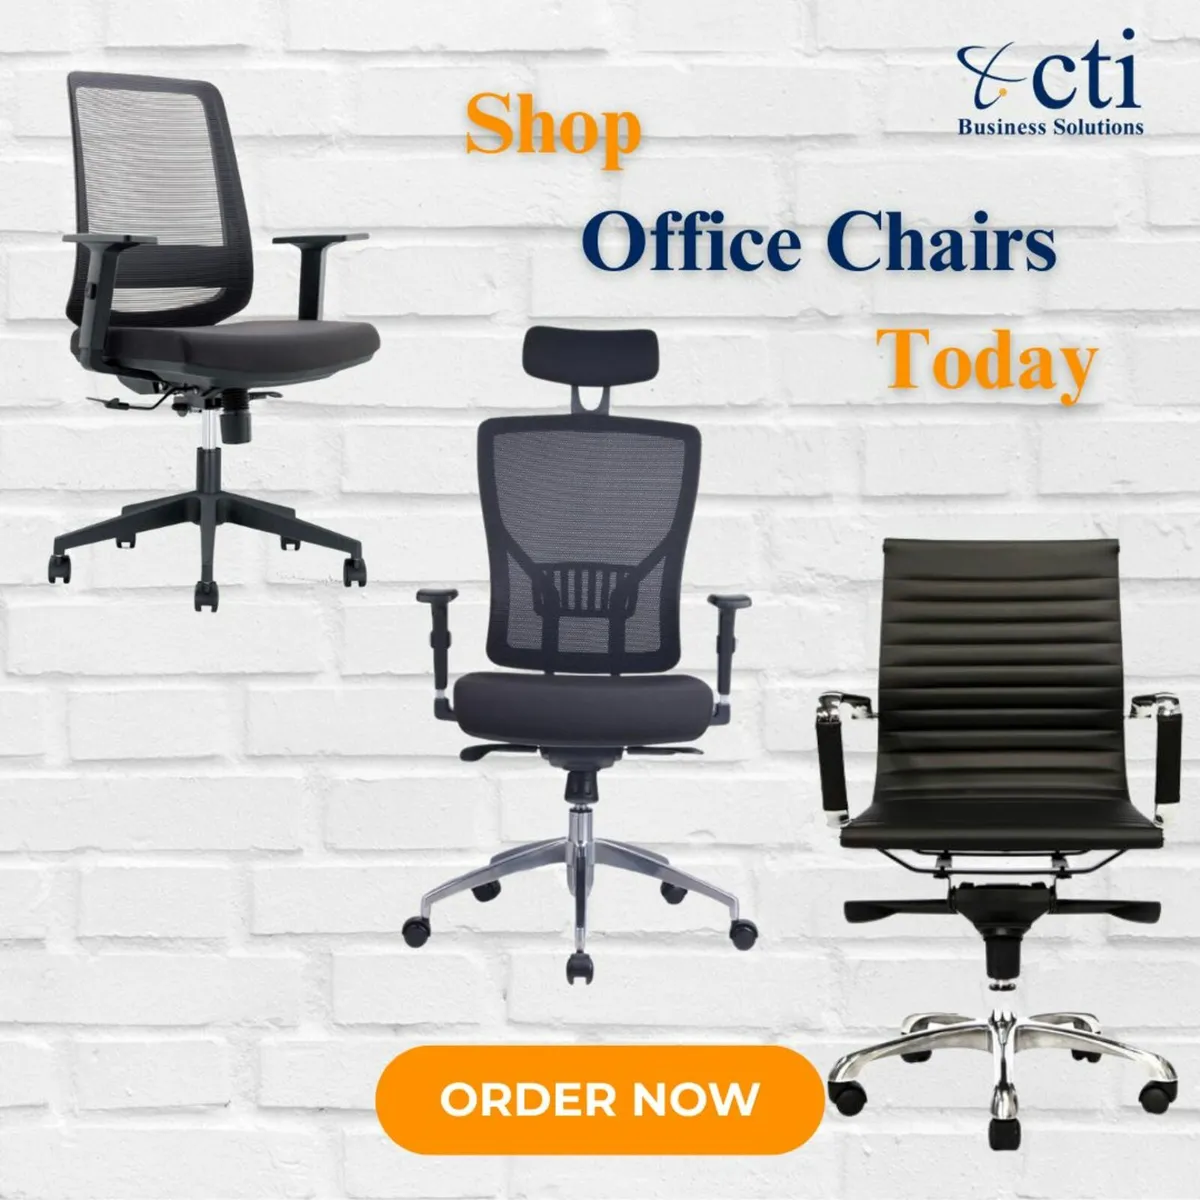 Brand New Office Chairs - Large Stock Available